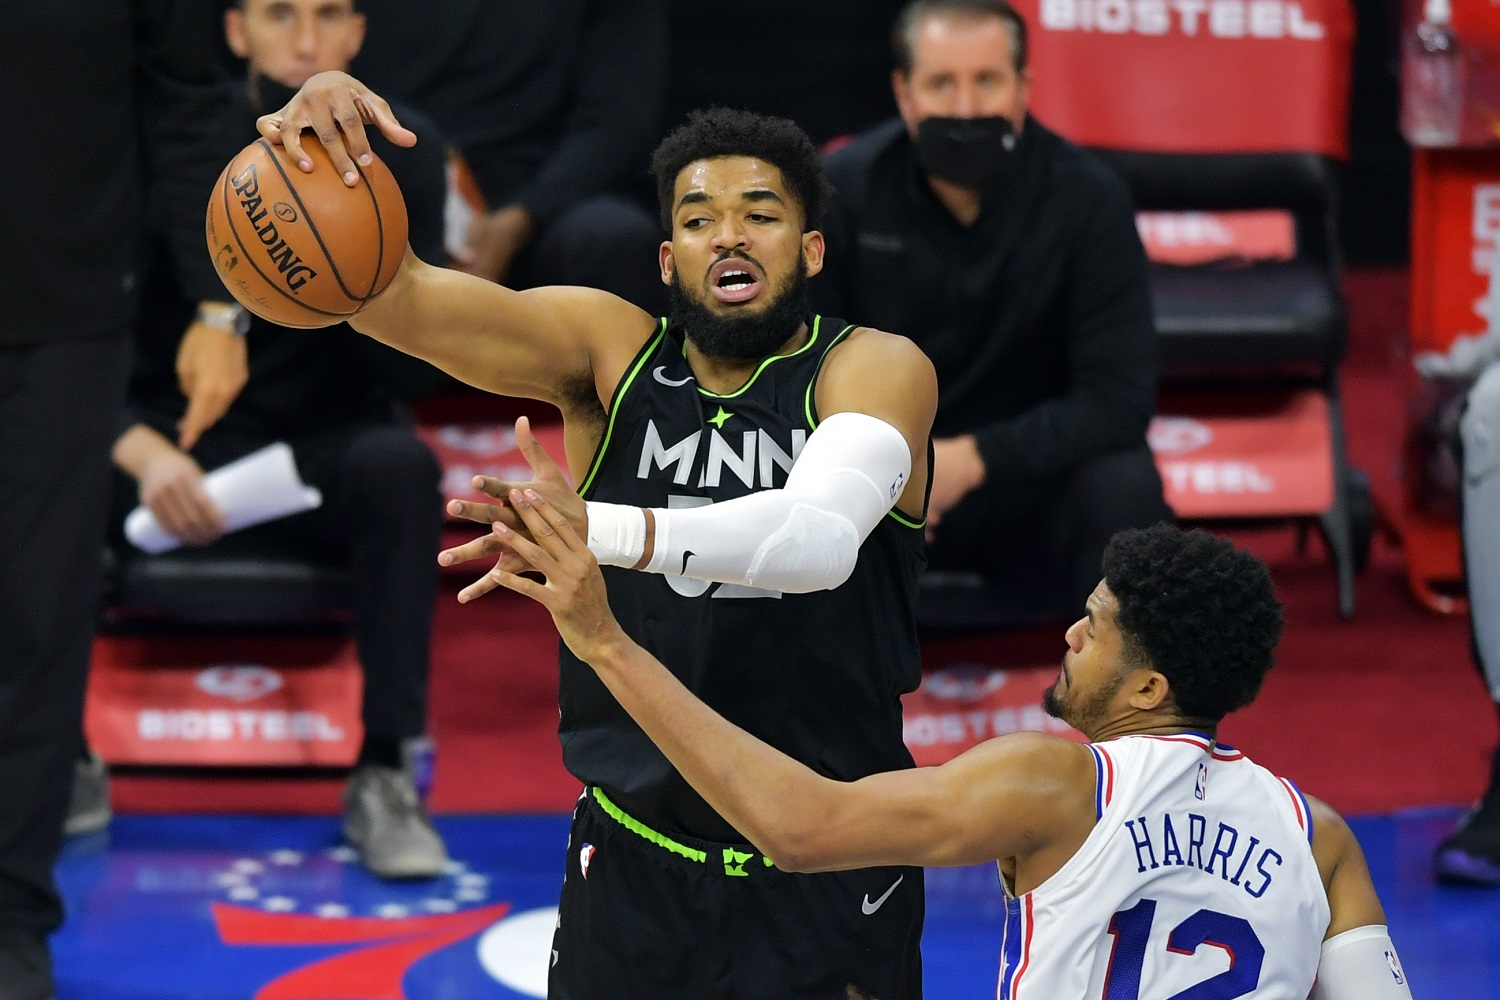 Karl-Anthony Towns is one of the key players for the NBA's Minnesota Timberwolves.